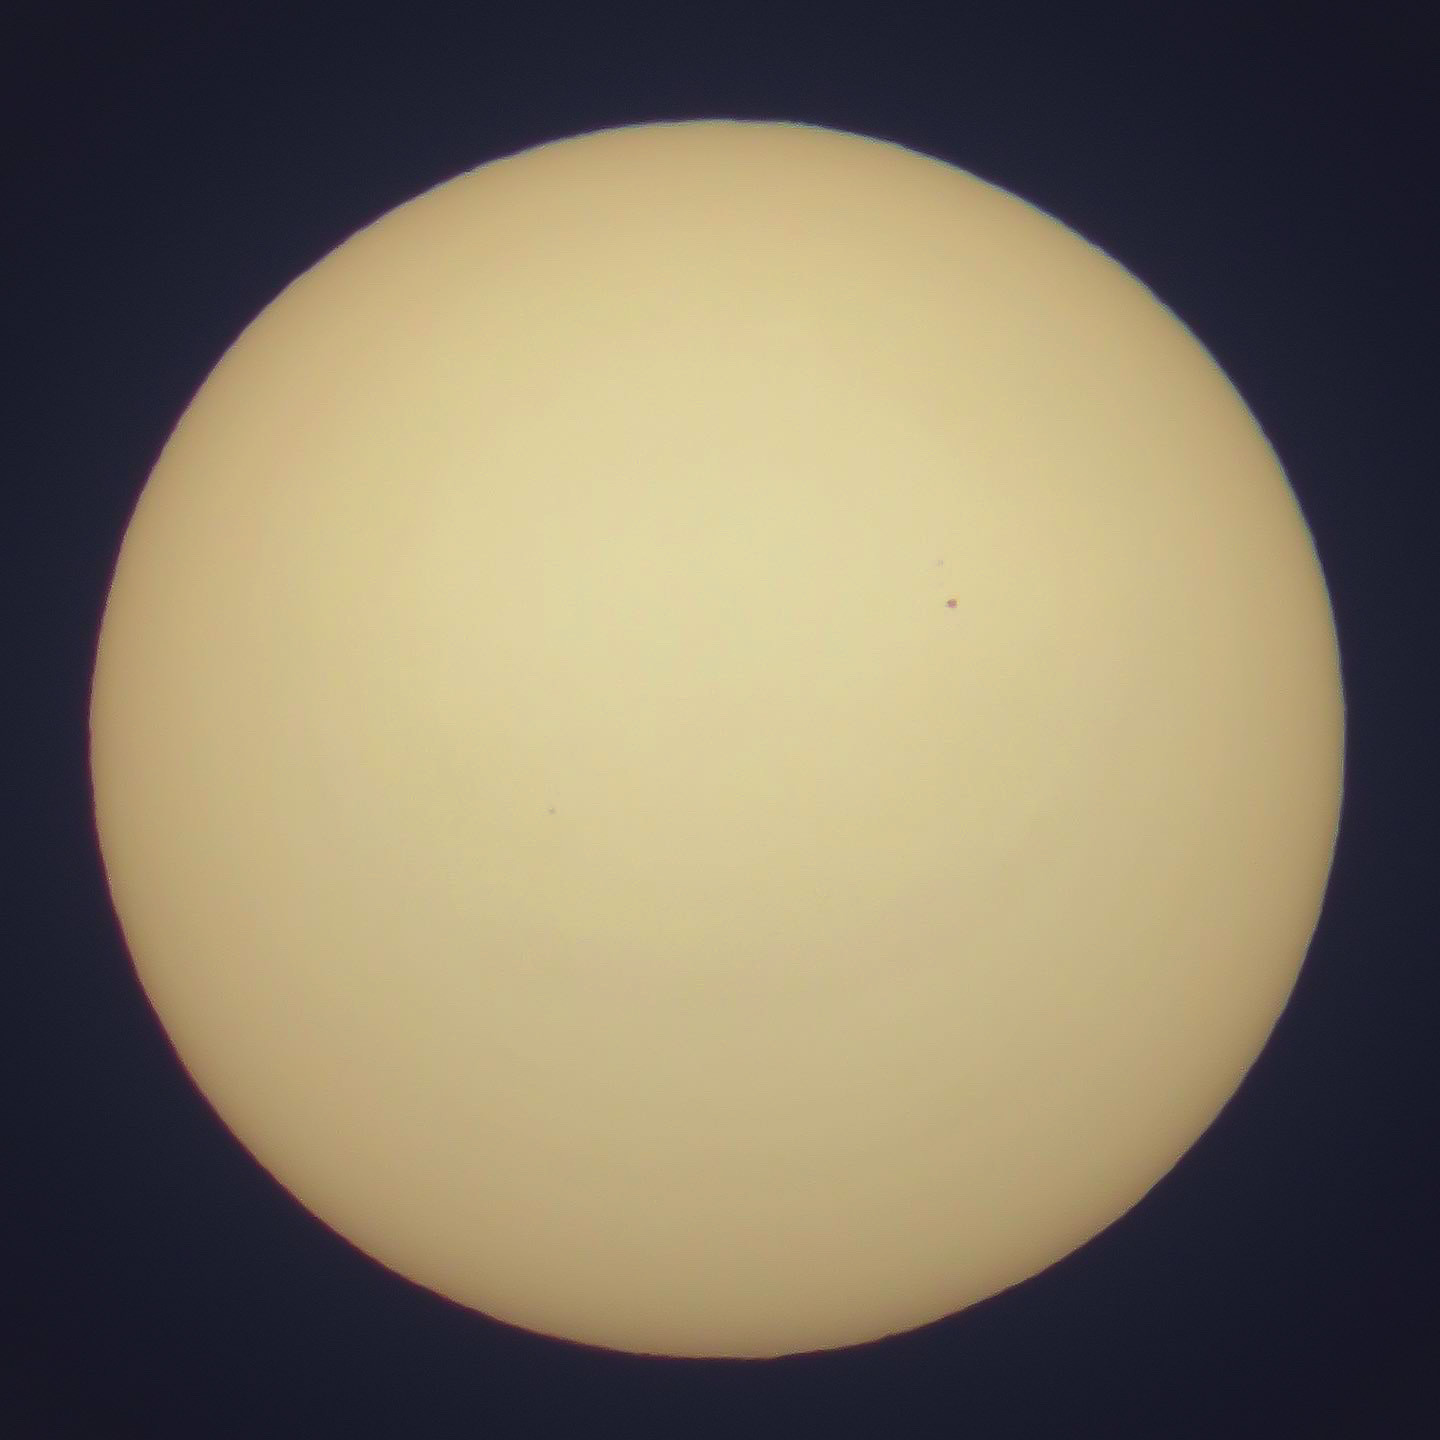 Close up of the sun with a sun spot